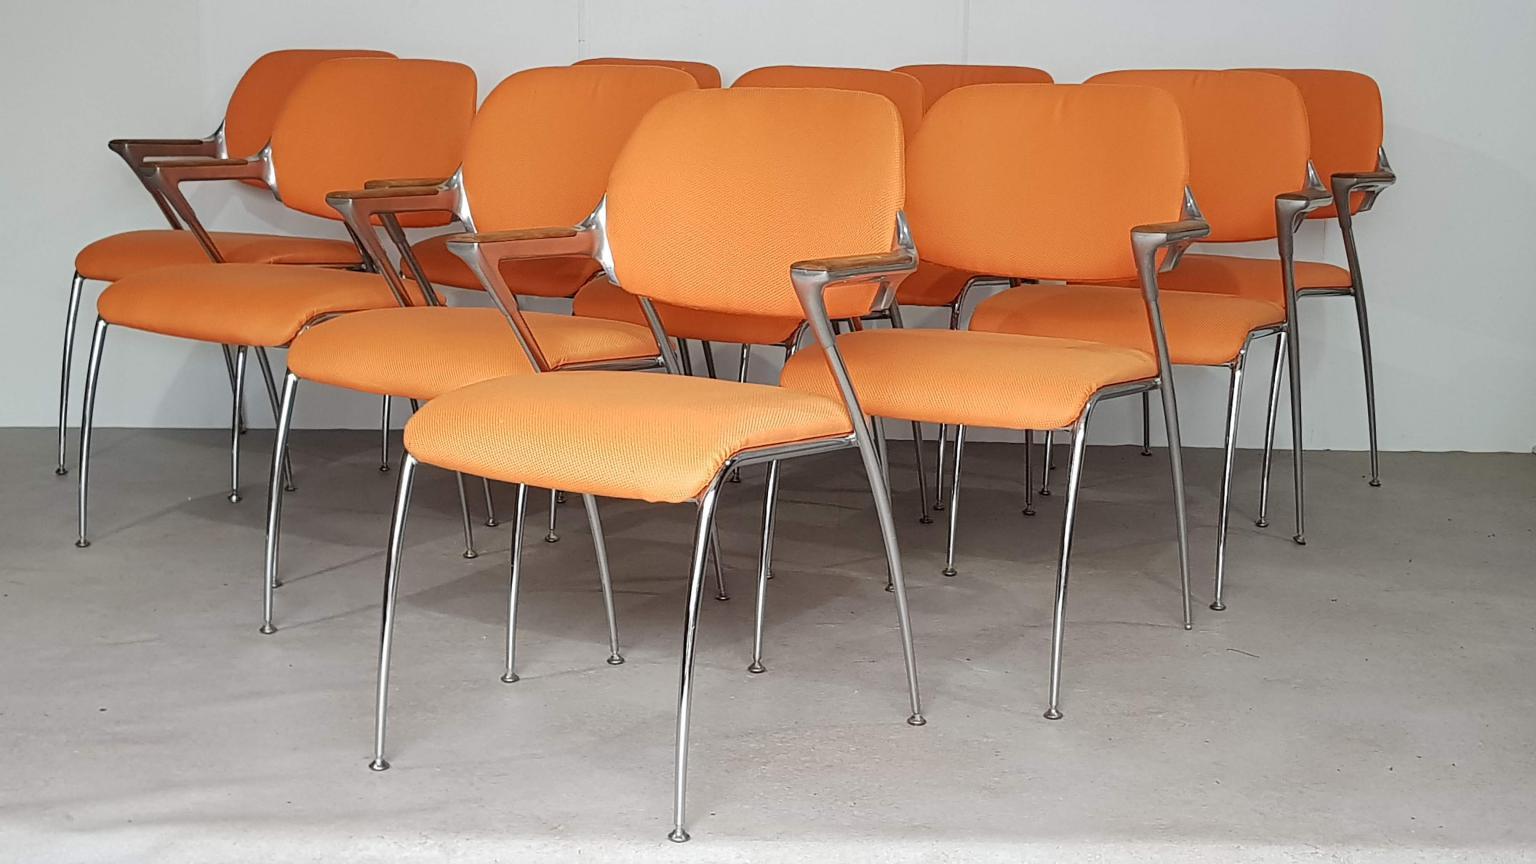 Ten Francesco Zaccone for Brunner “Golf” dining chairs.

Stacking chairs. Metal frame with wooden armrests, orange upholstery.

Measures: Width: 58 cm, seating 45 cm
Depth: 50 cm, seating 45 cm
Height: 82 cm, seating 45 cm.